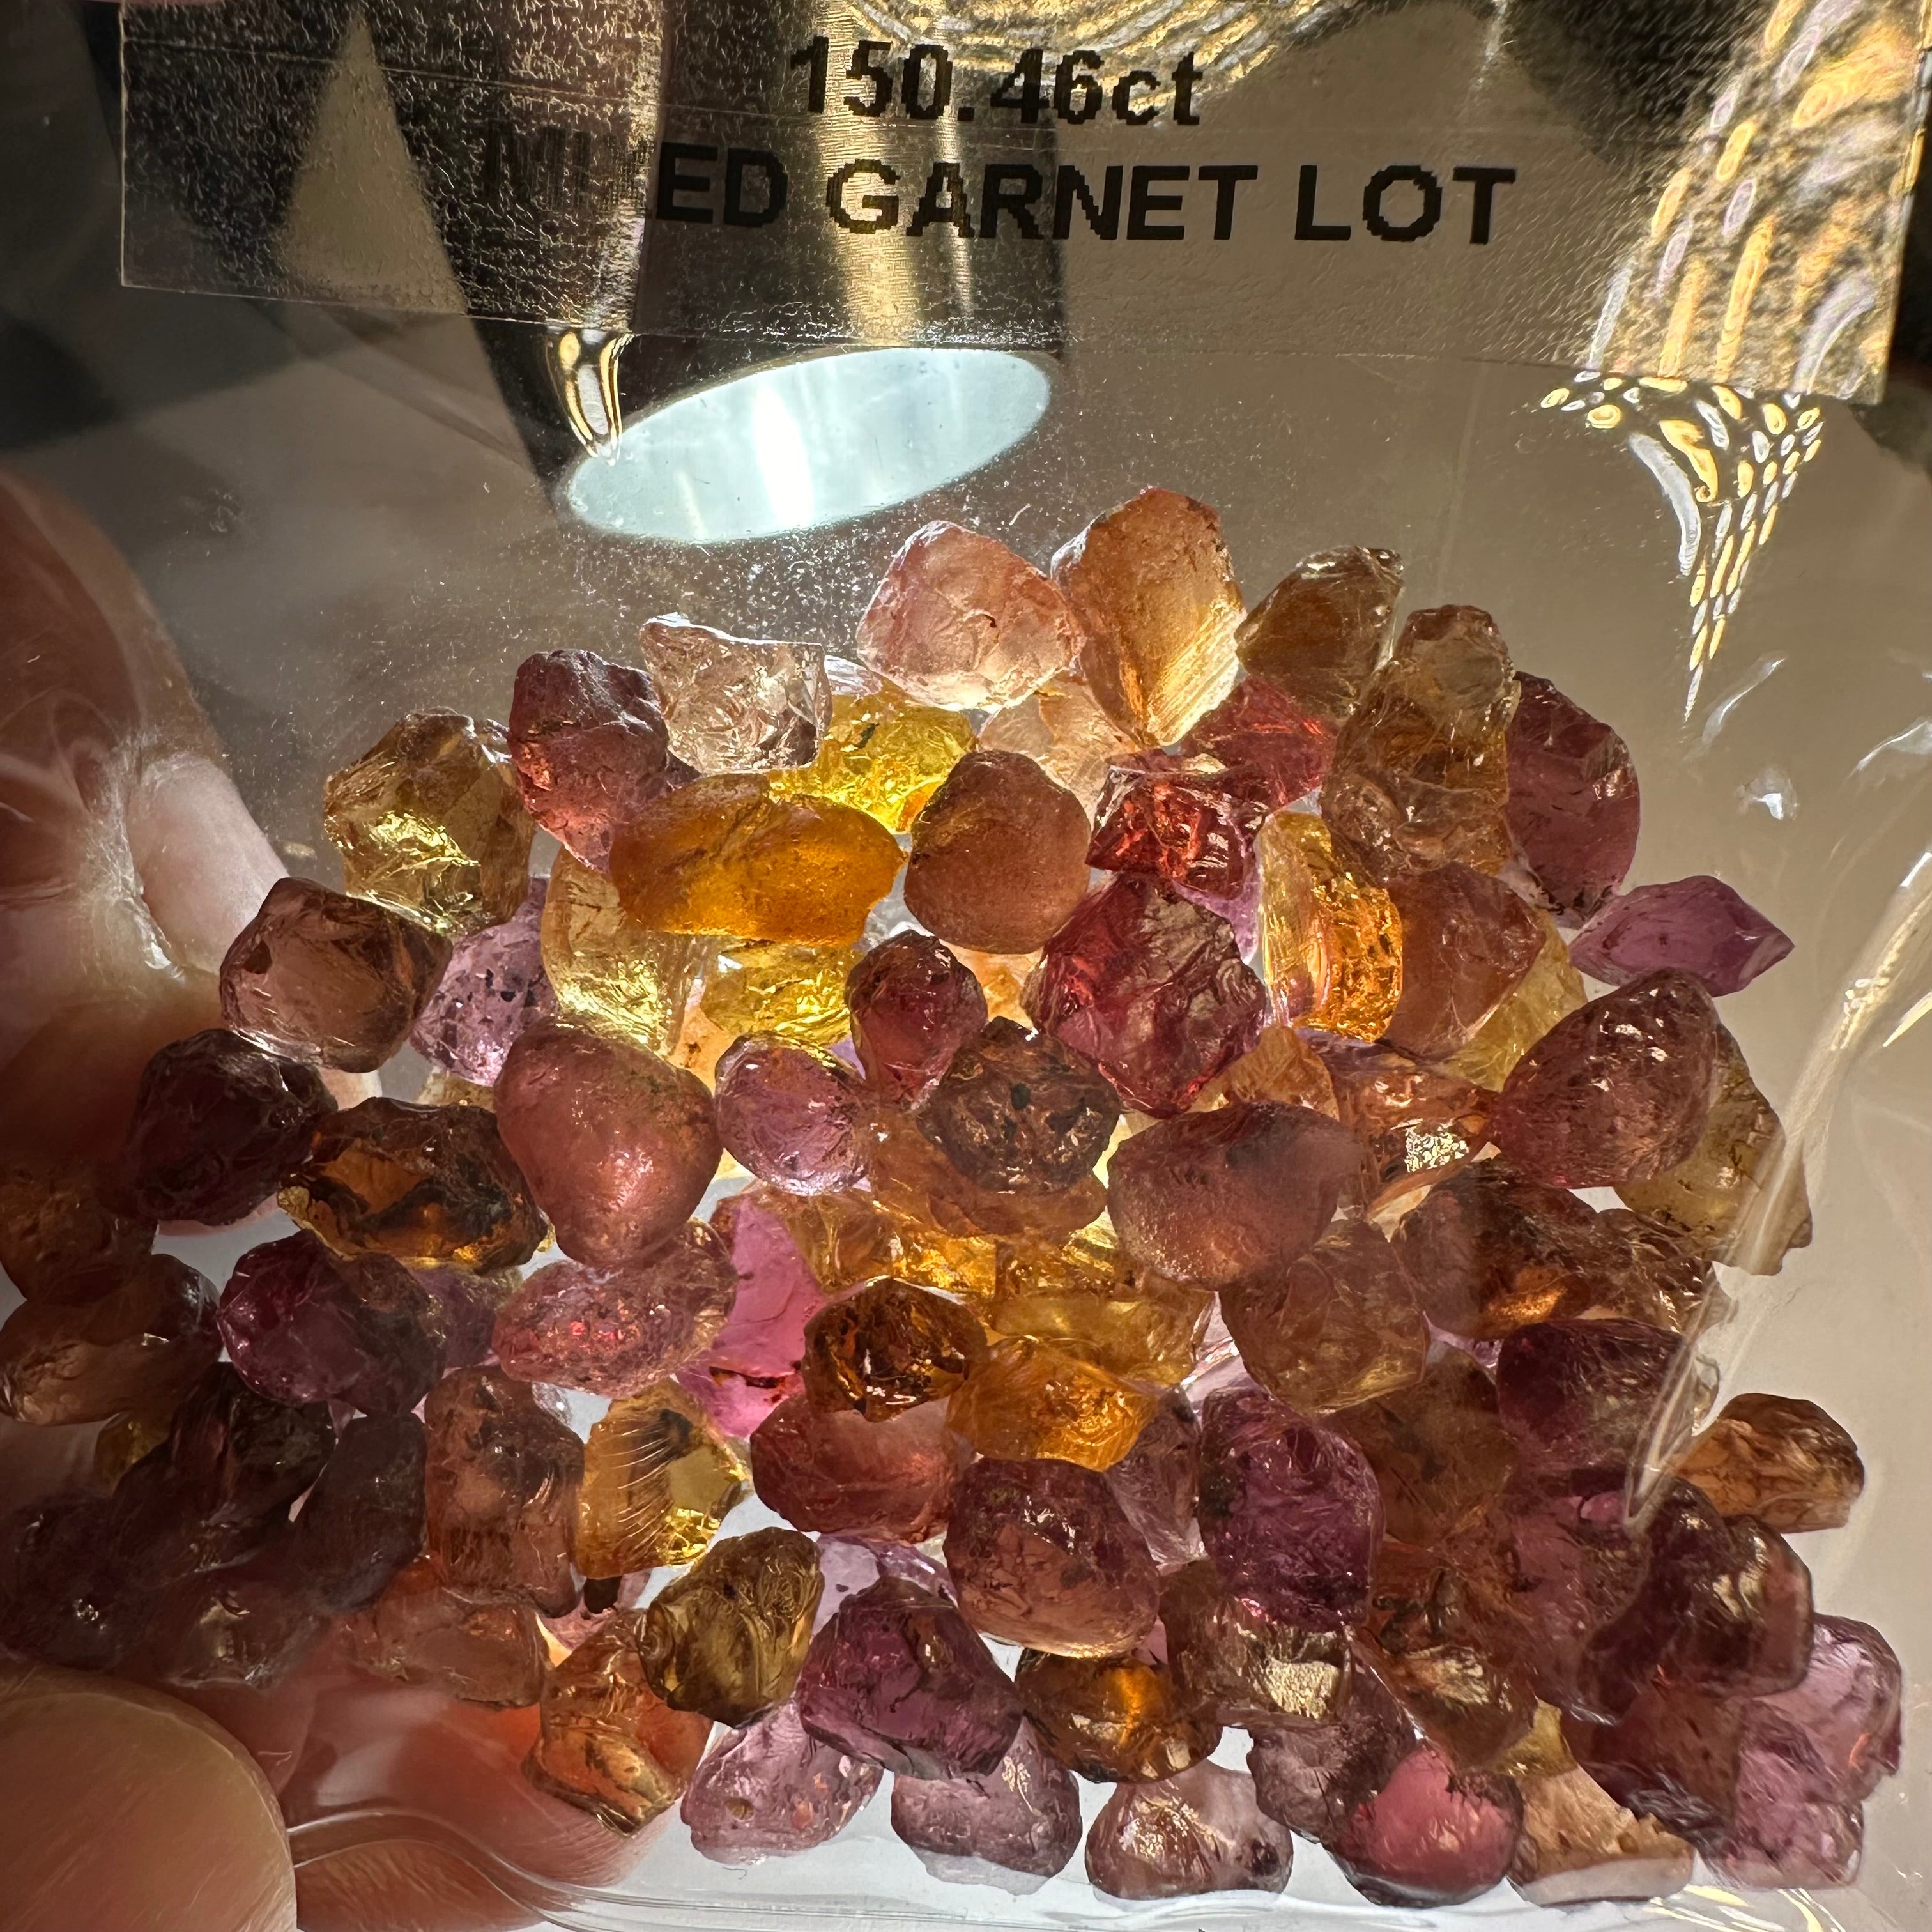 150.46ct Mixed Garnet Lot, Tanzania, Untreated Unheated, slightly included to included